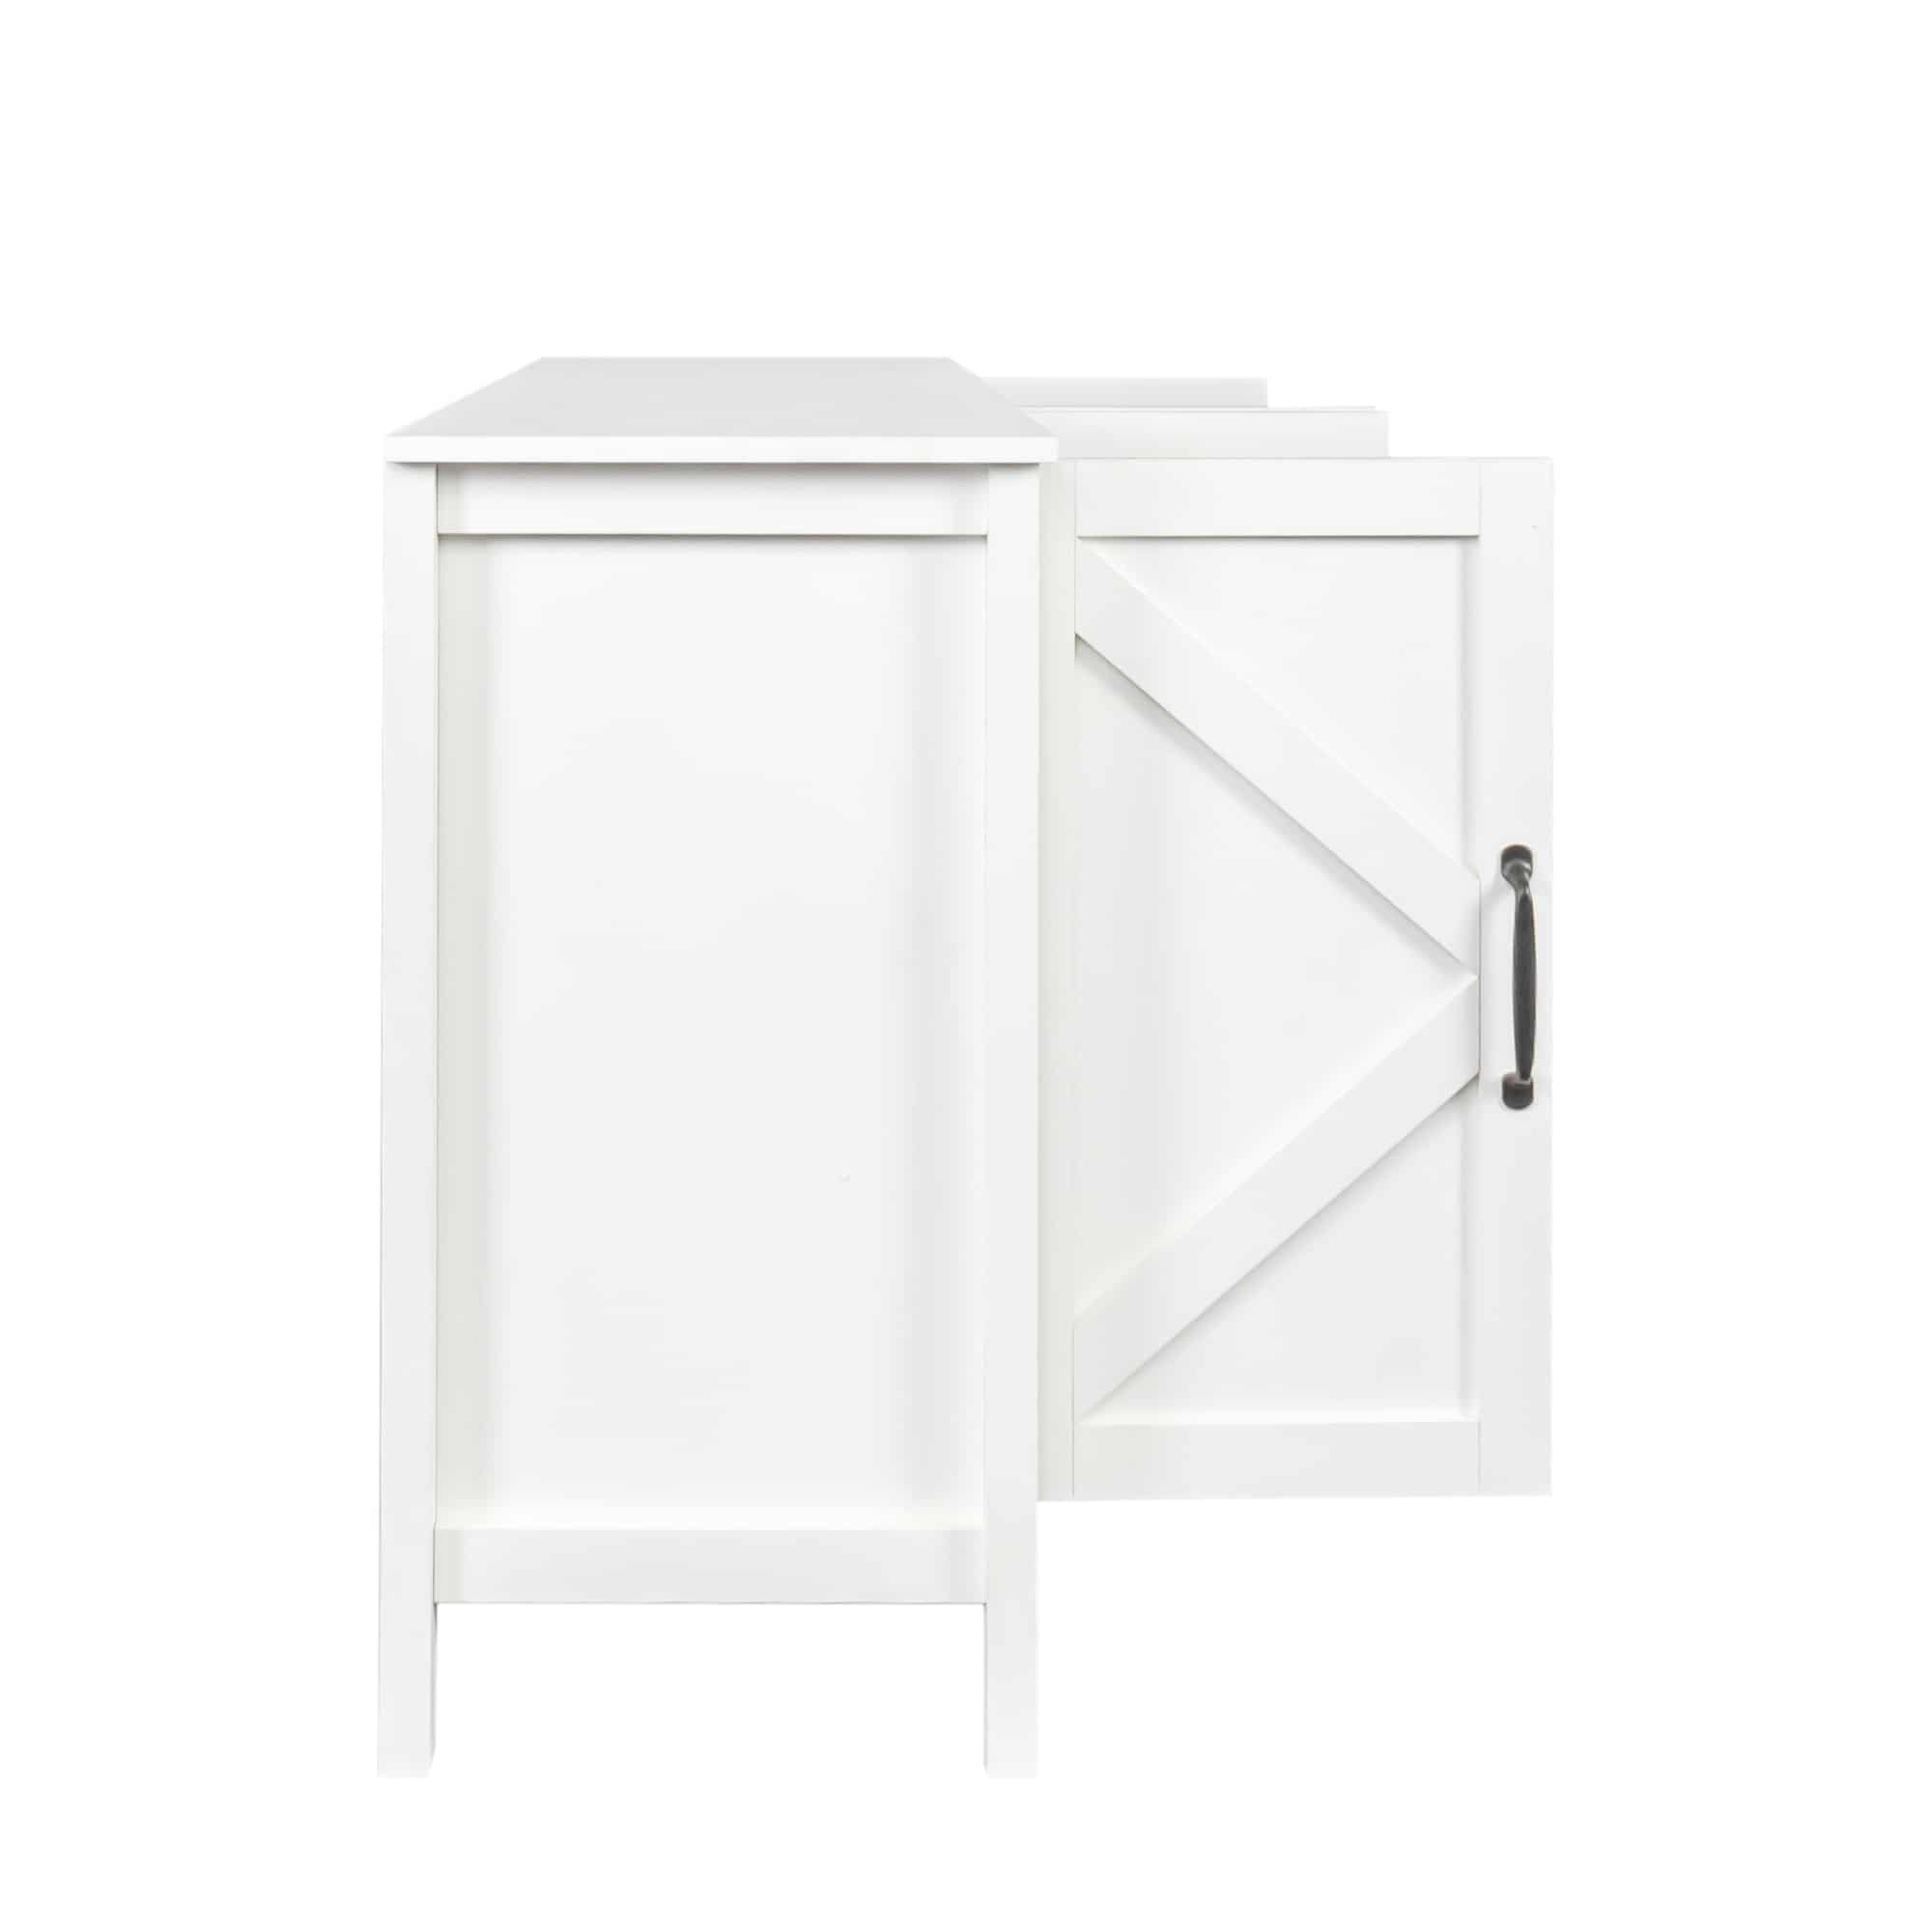 Freestanding Cabinet with 4 Doors and 4 open shelgves - White